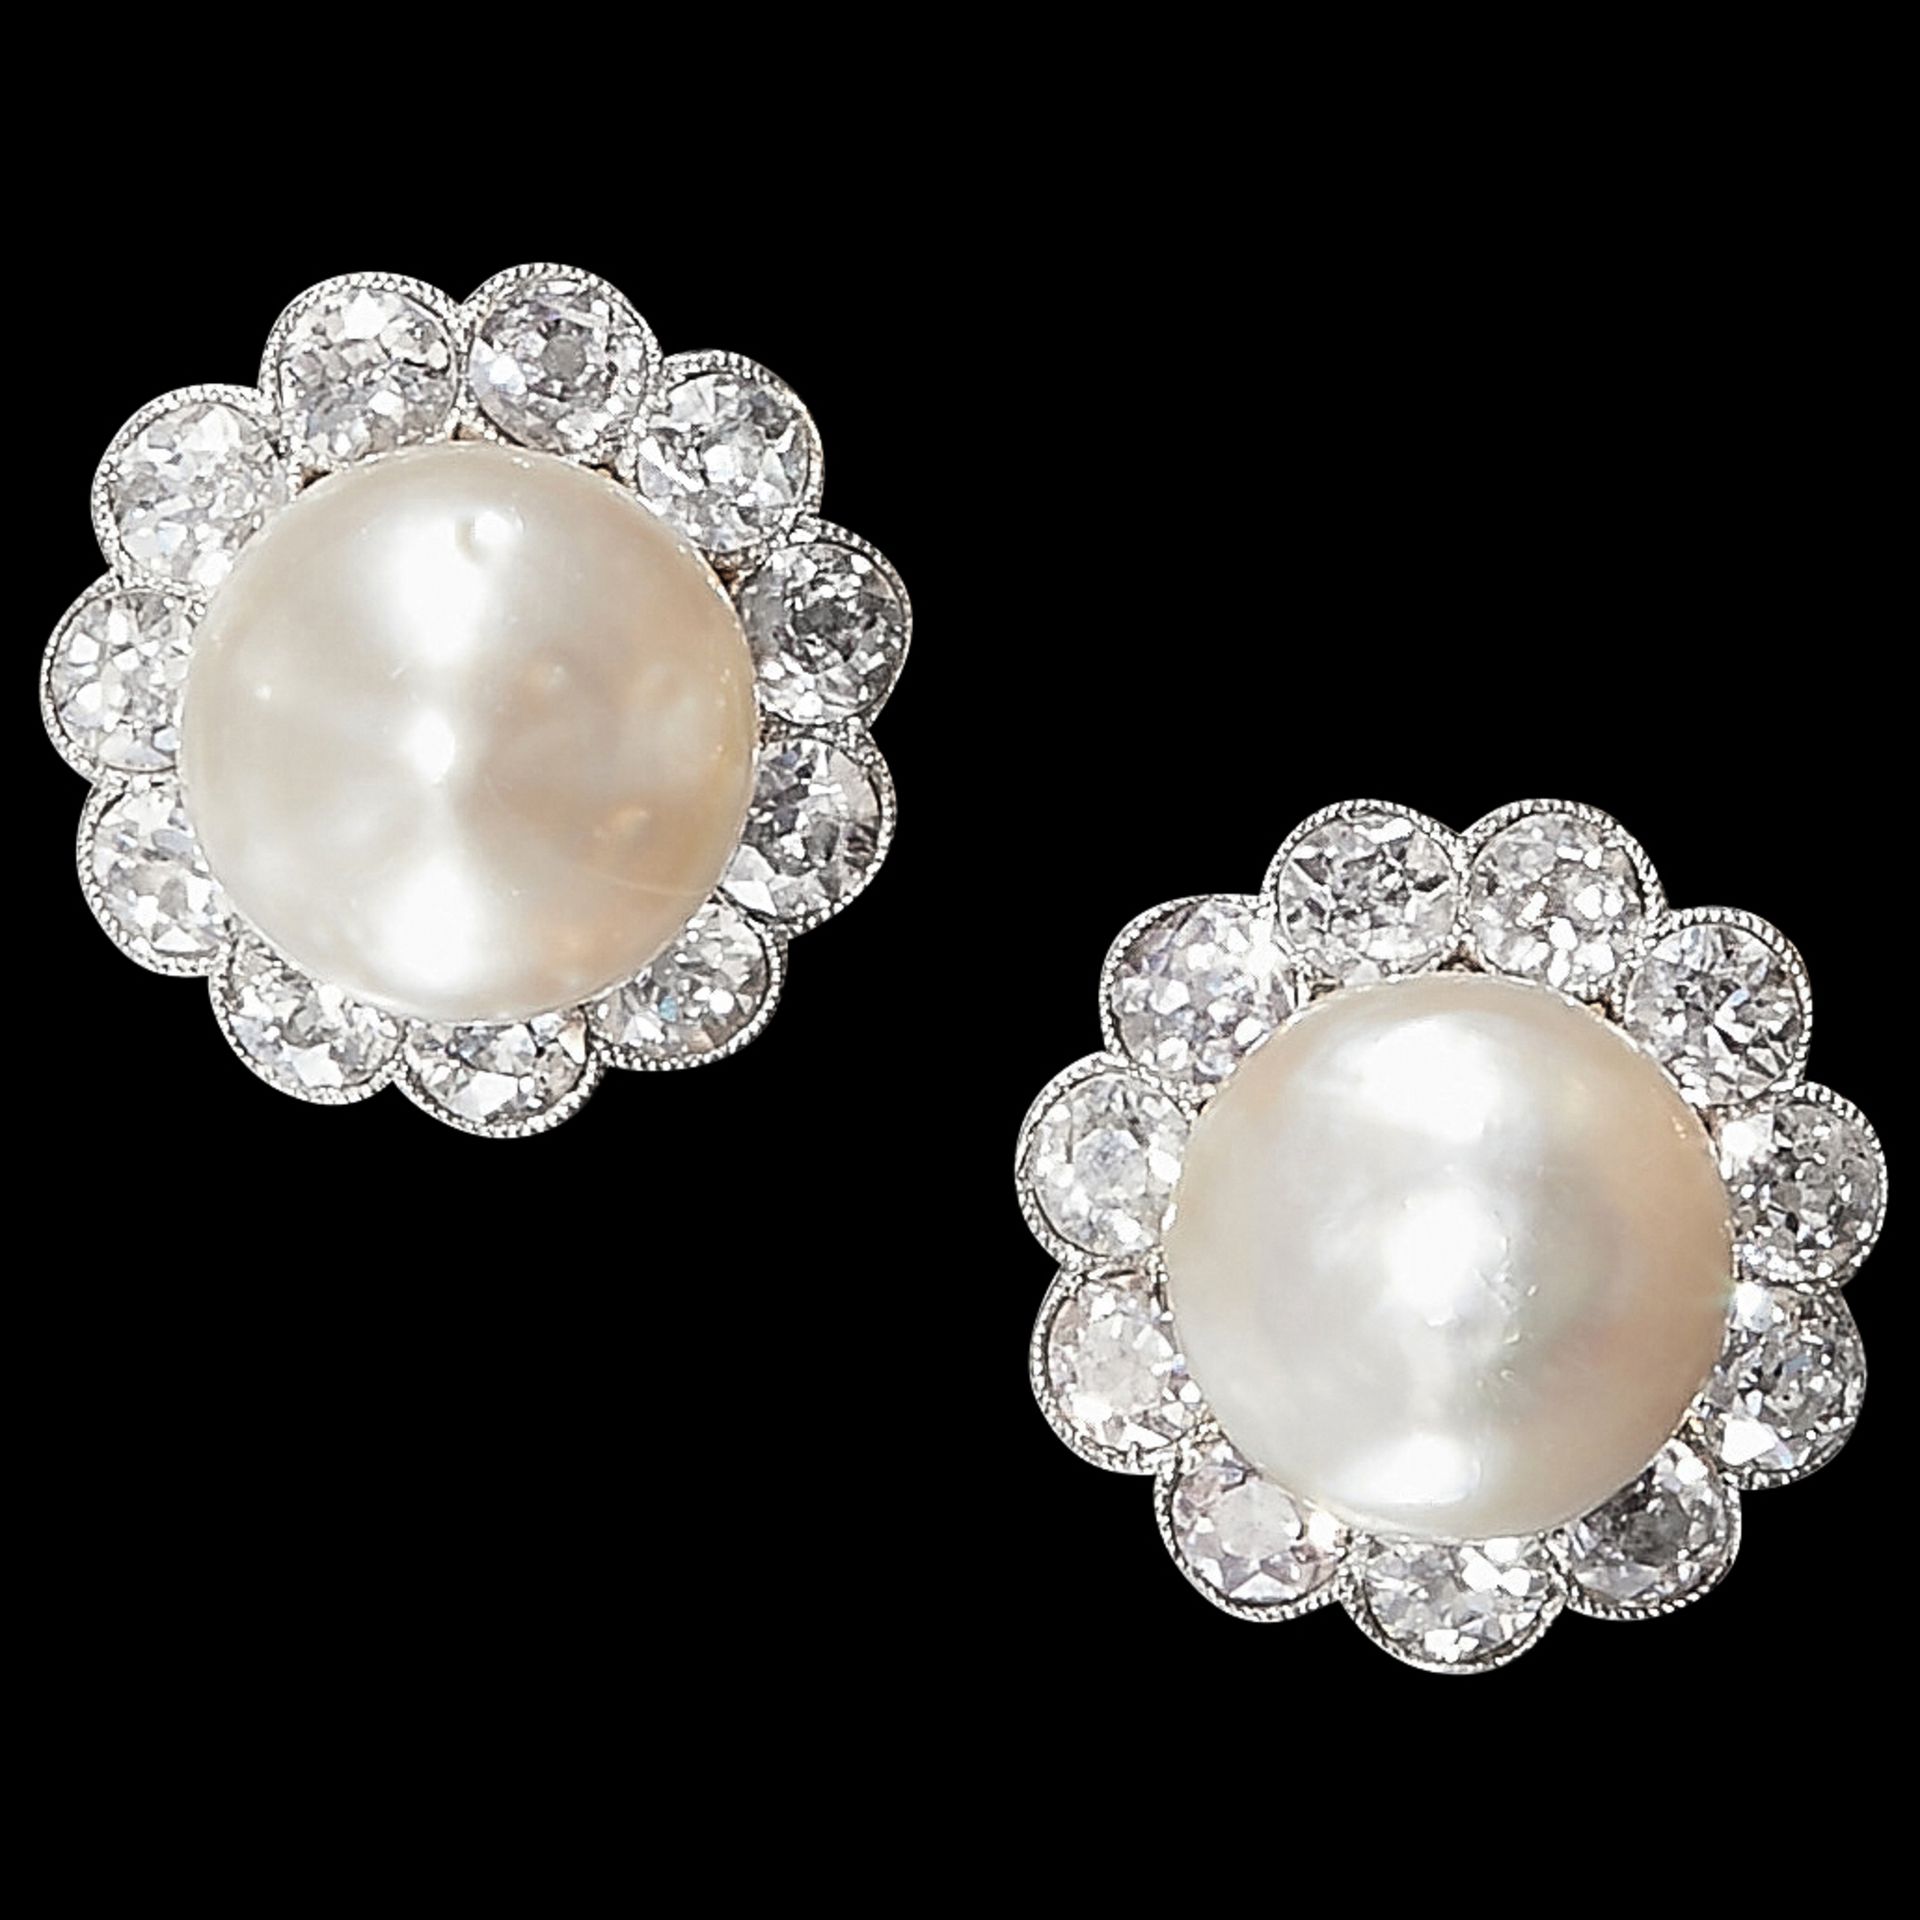 IMPRESSIVE CERTIFICATED PAIR OF NATURAL SALTWATER PEARL AND DIAMOND EARRINGS